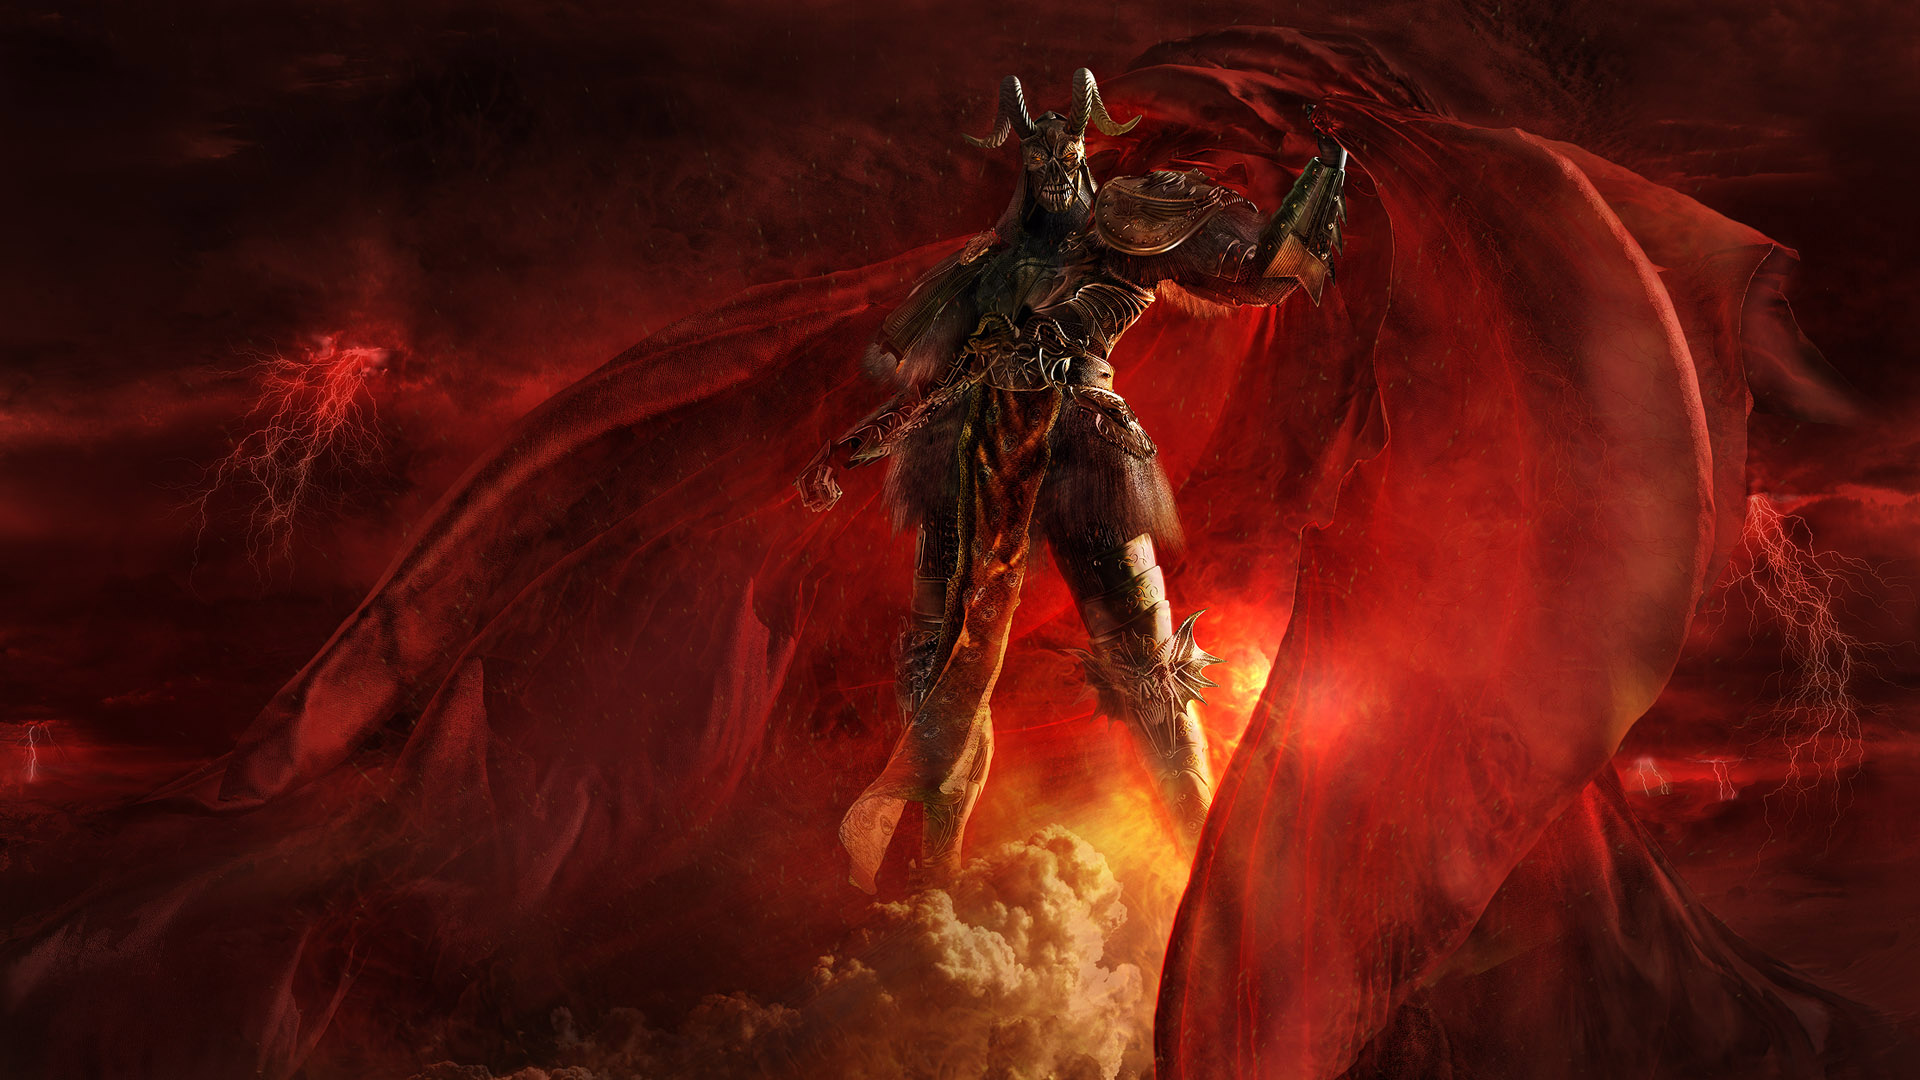 hell, fire, evil, dark, demon, fantasy, red, warhammer cell phone wallpapers